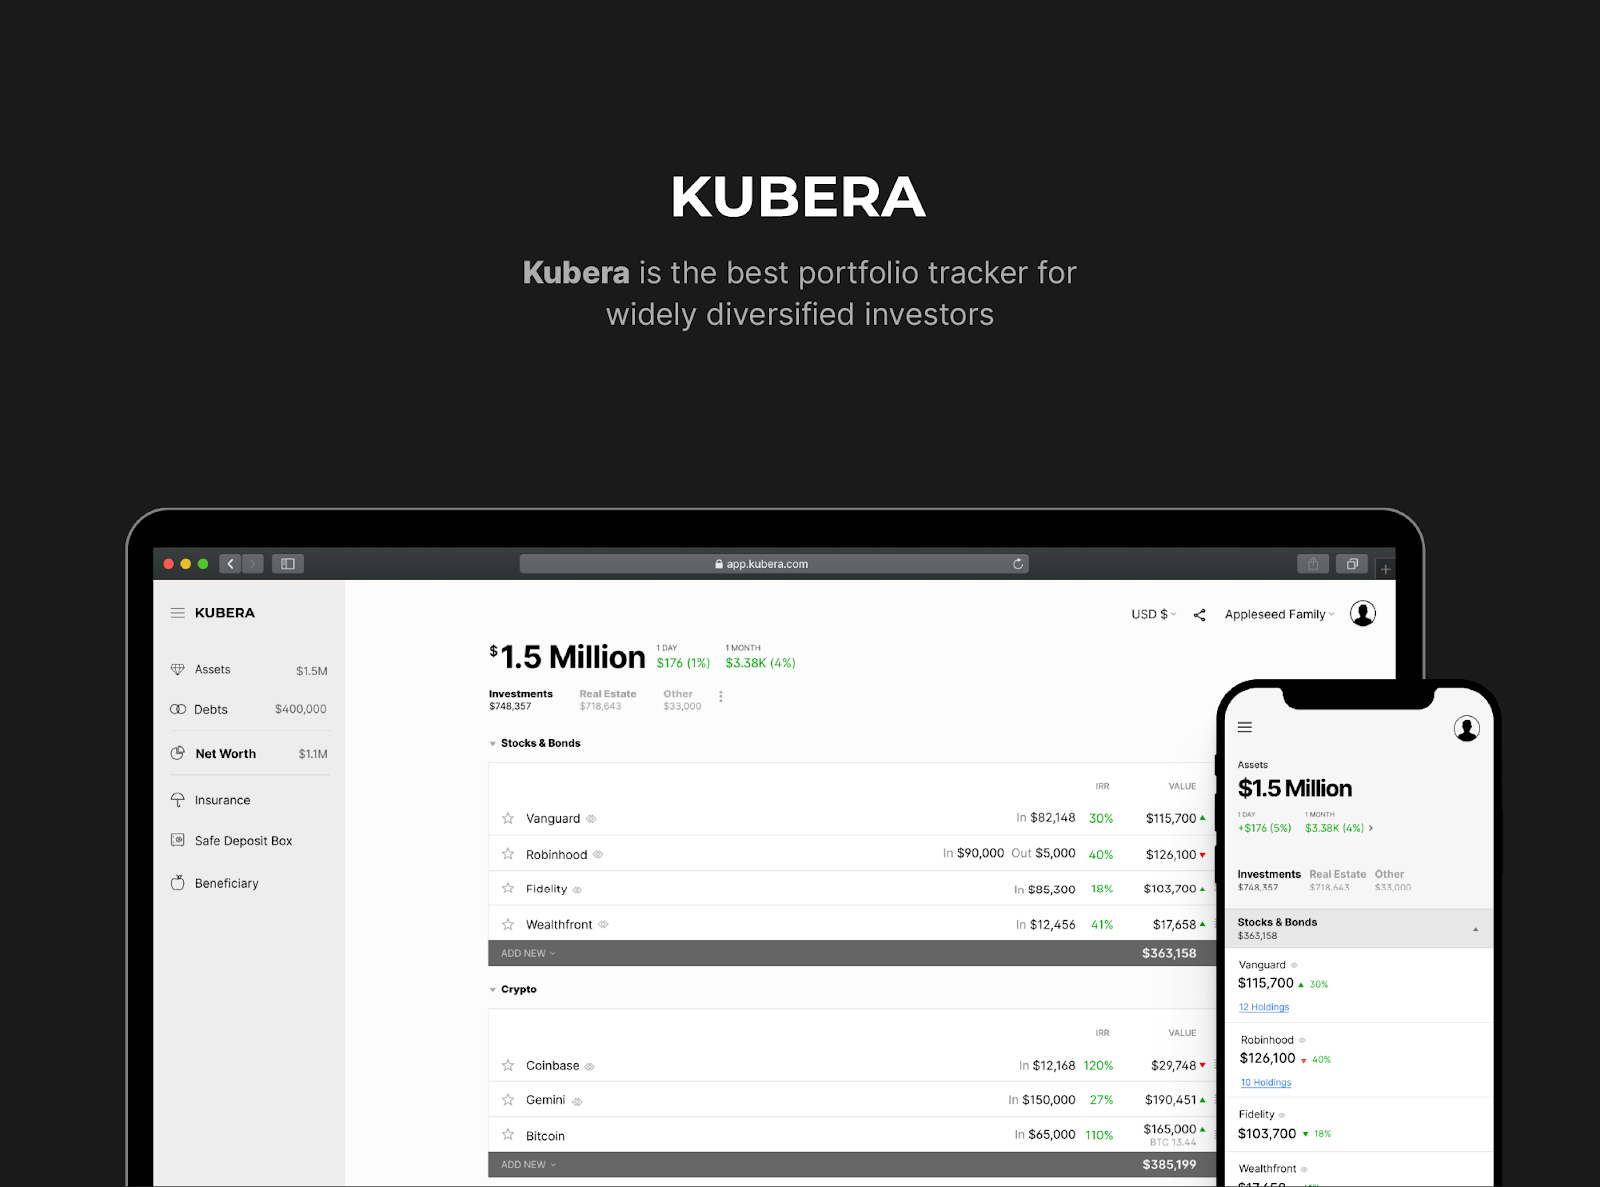 Kubera is the best portfolio tracker for widely diversified investors